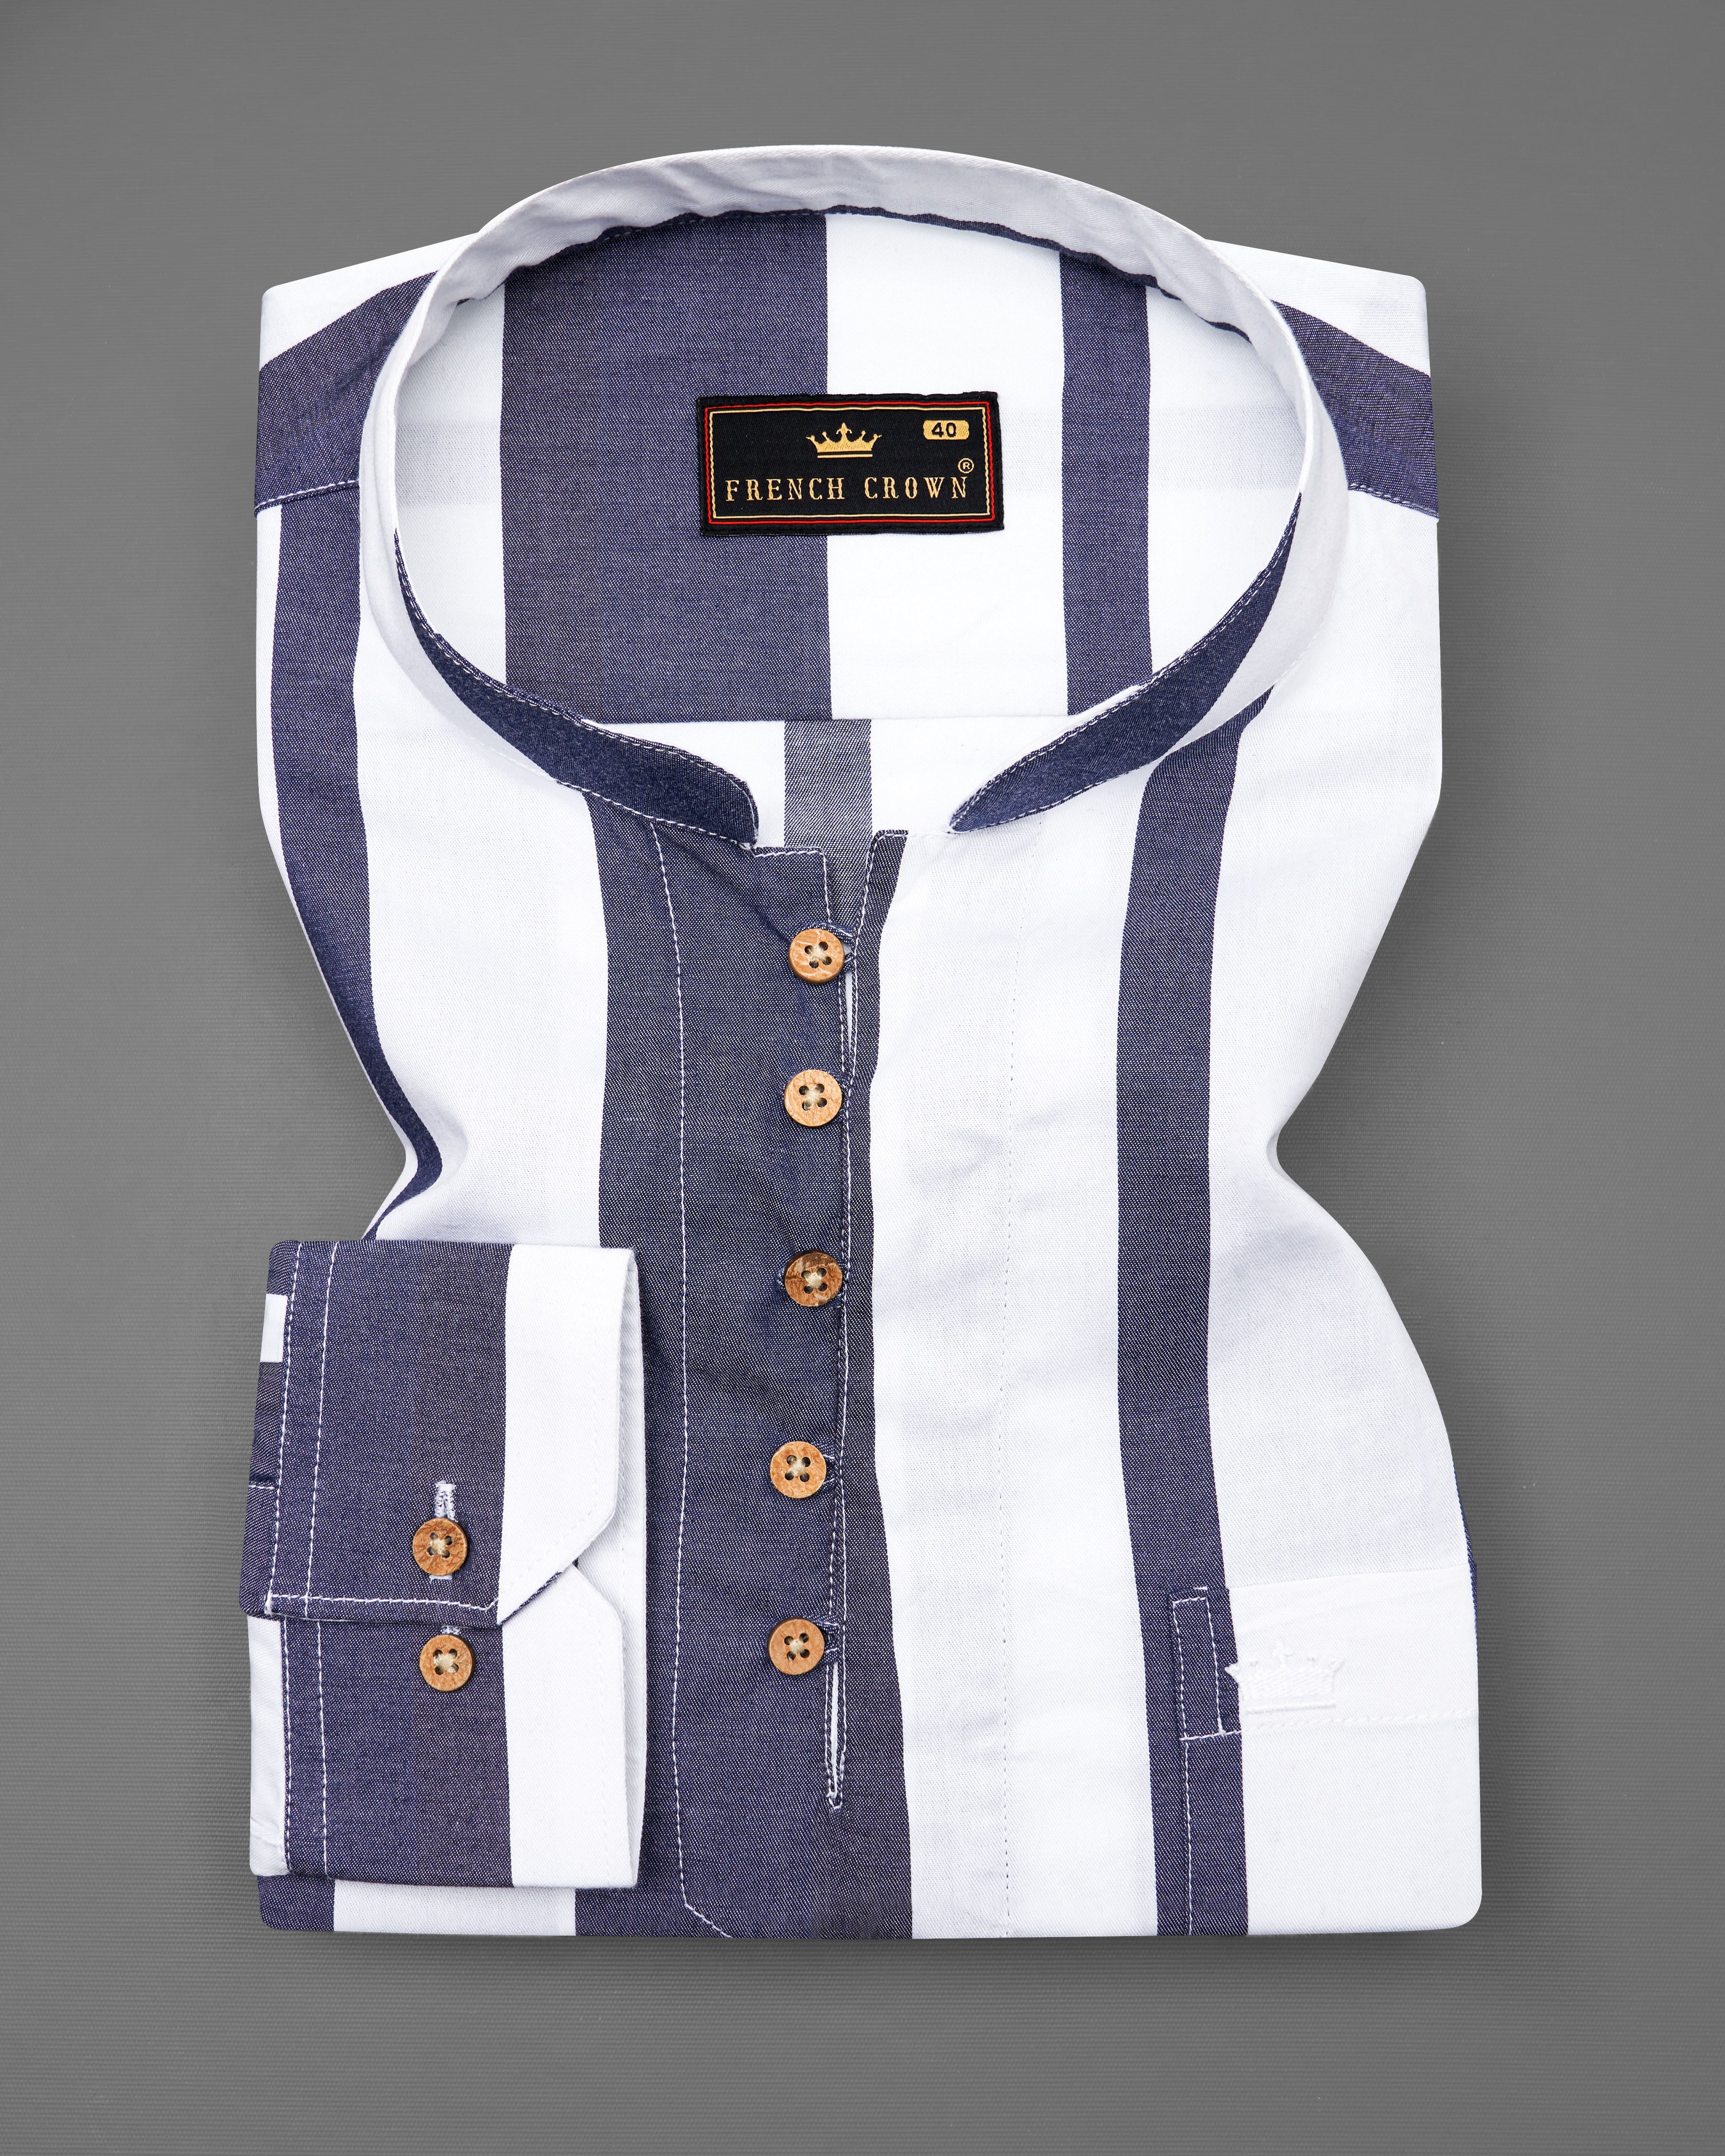 Bright White with Vampire Blue Striped Royal Oxford Kurta Shirt  8705-KS-38,8705-KS-H-38,8705-KS-39,8705-KS-H-39,8705-KS-40,8705-KS-H-40,8705-KS-42,8705-KS-H-42,8705-KS-44,8705-KS-H-44,8705-KS-46,8705-KS-H-46,8705-KS-48,8705-KS-H-48,8705-KS-50,8705-KS-H-50,8705-KS-52,8705-KS-H-52